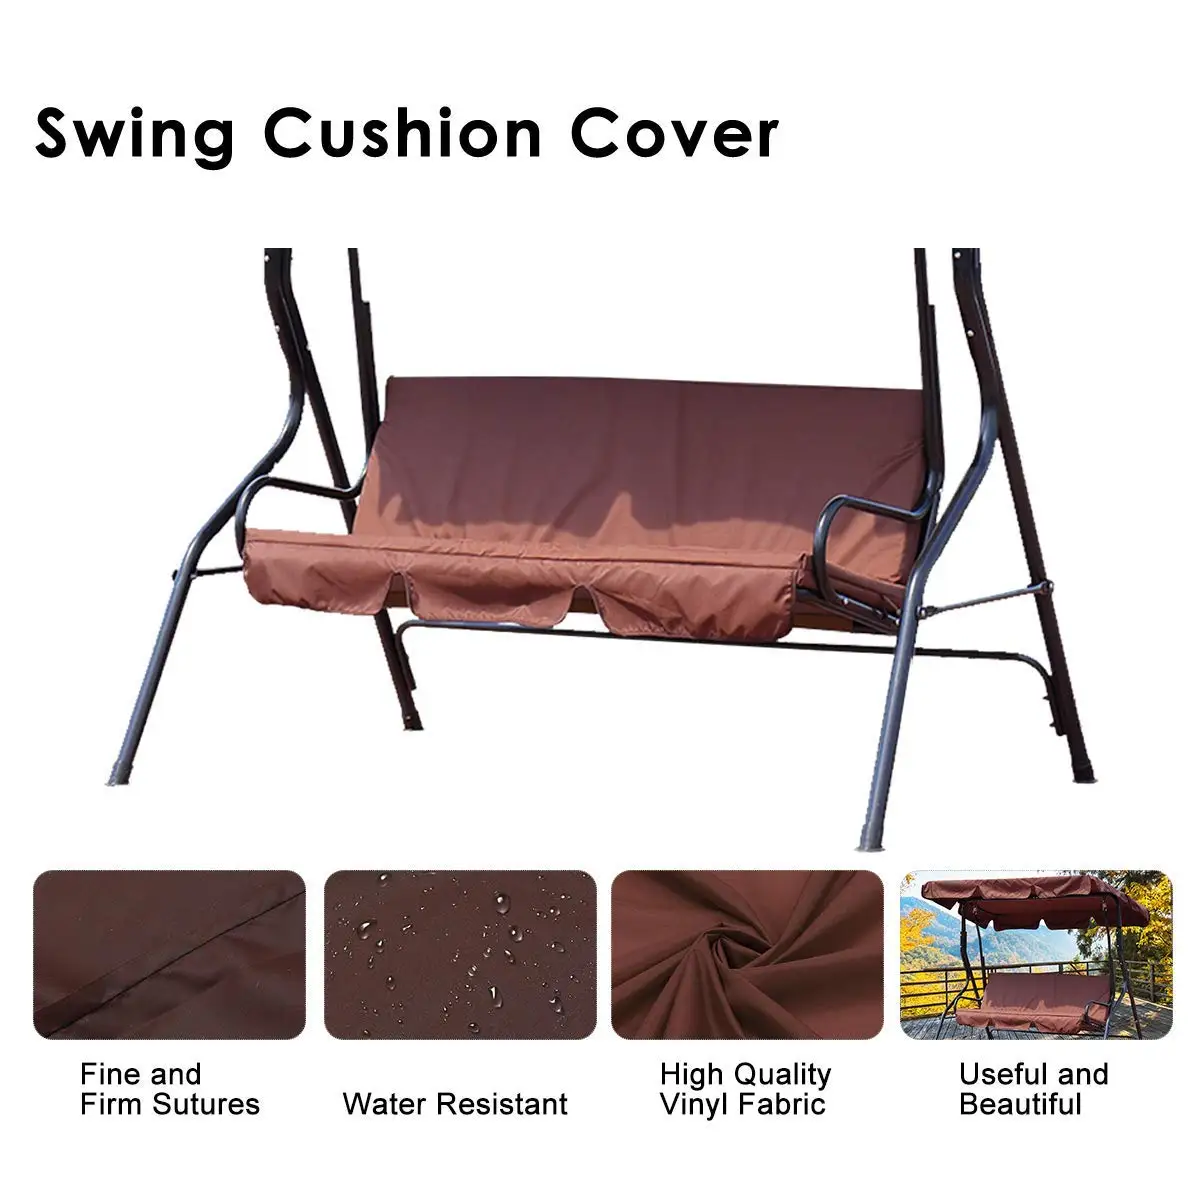 Cheap 60 Swing Cushion, find 60 Swing Cushion deals on line at Alibaba.com